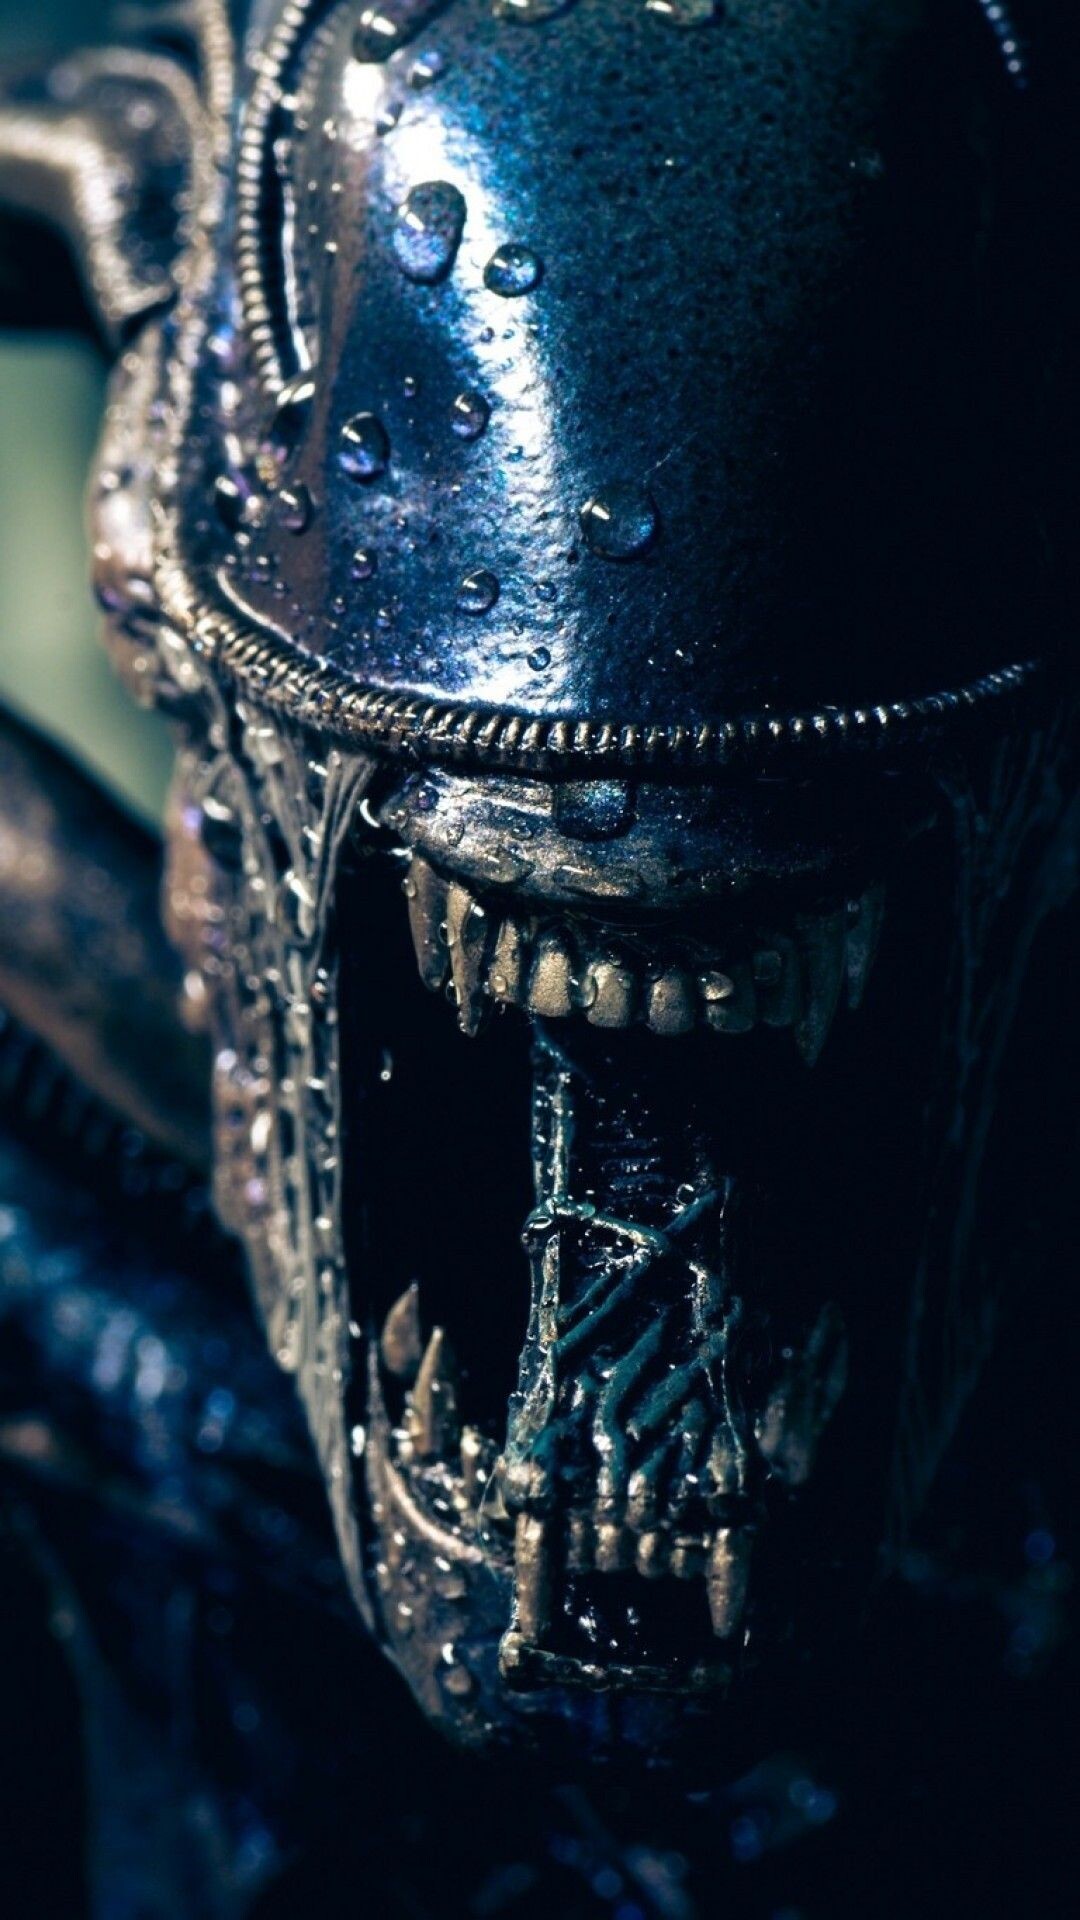 H.R. Giger: Close Up For The Alien's Jaws, Сhitinous Shell And Acid Blood. 1080x1920 Full HD Background.